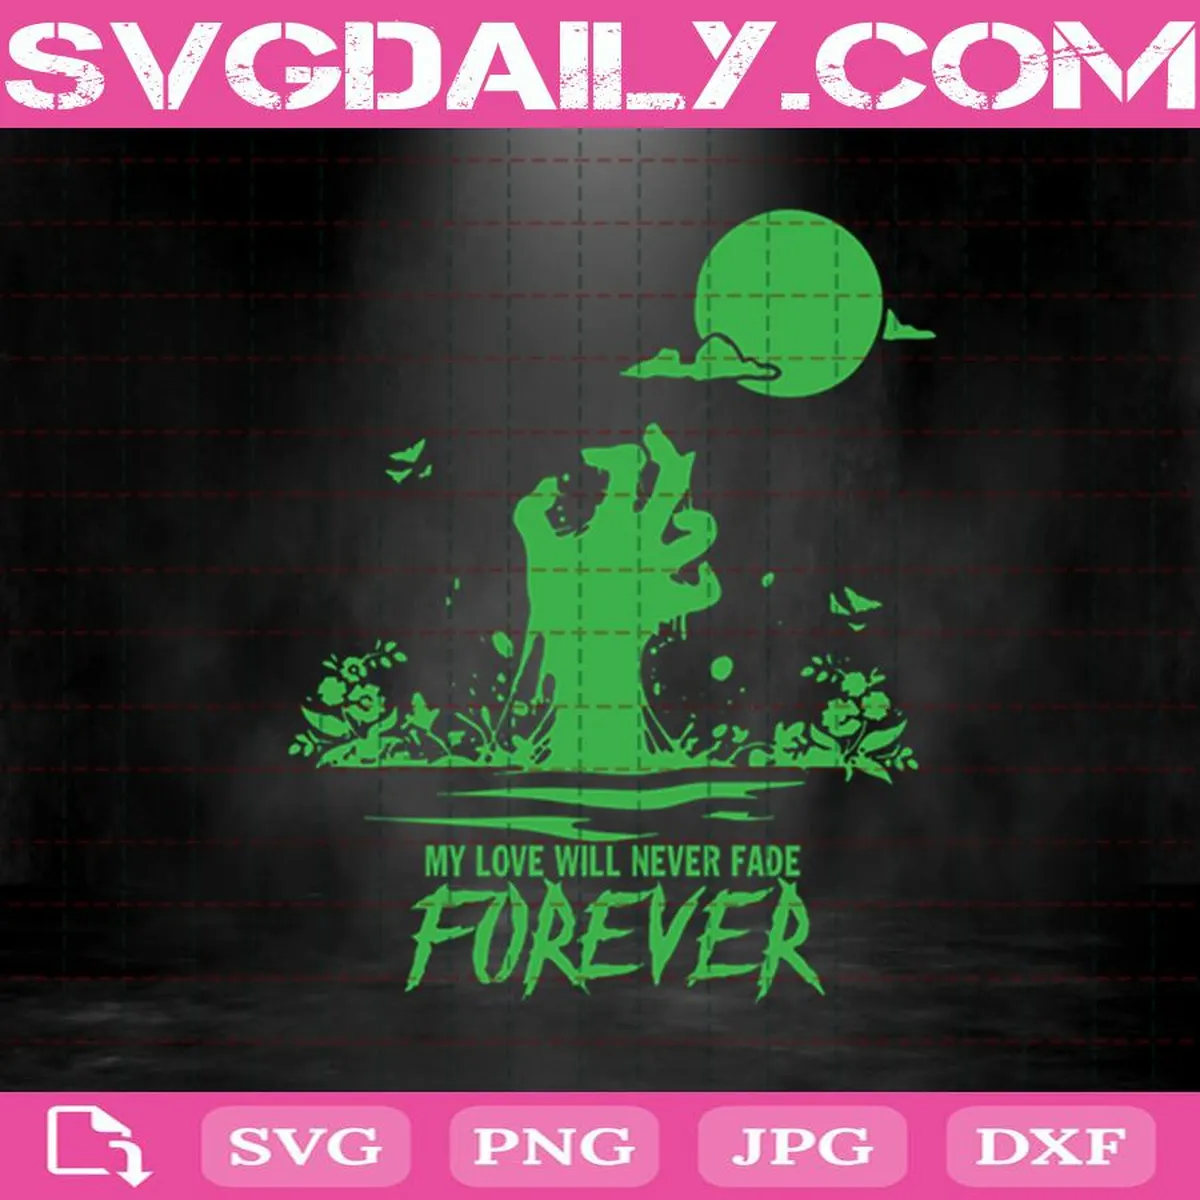 My Love Will Never Fade Forever Svg, Halloween Svg, Zombie Svg, Zombie Hand Svg, Horror Svg, Svg Png Dxf Eps